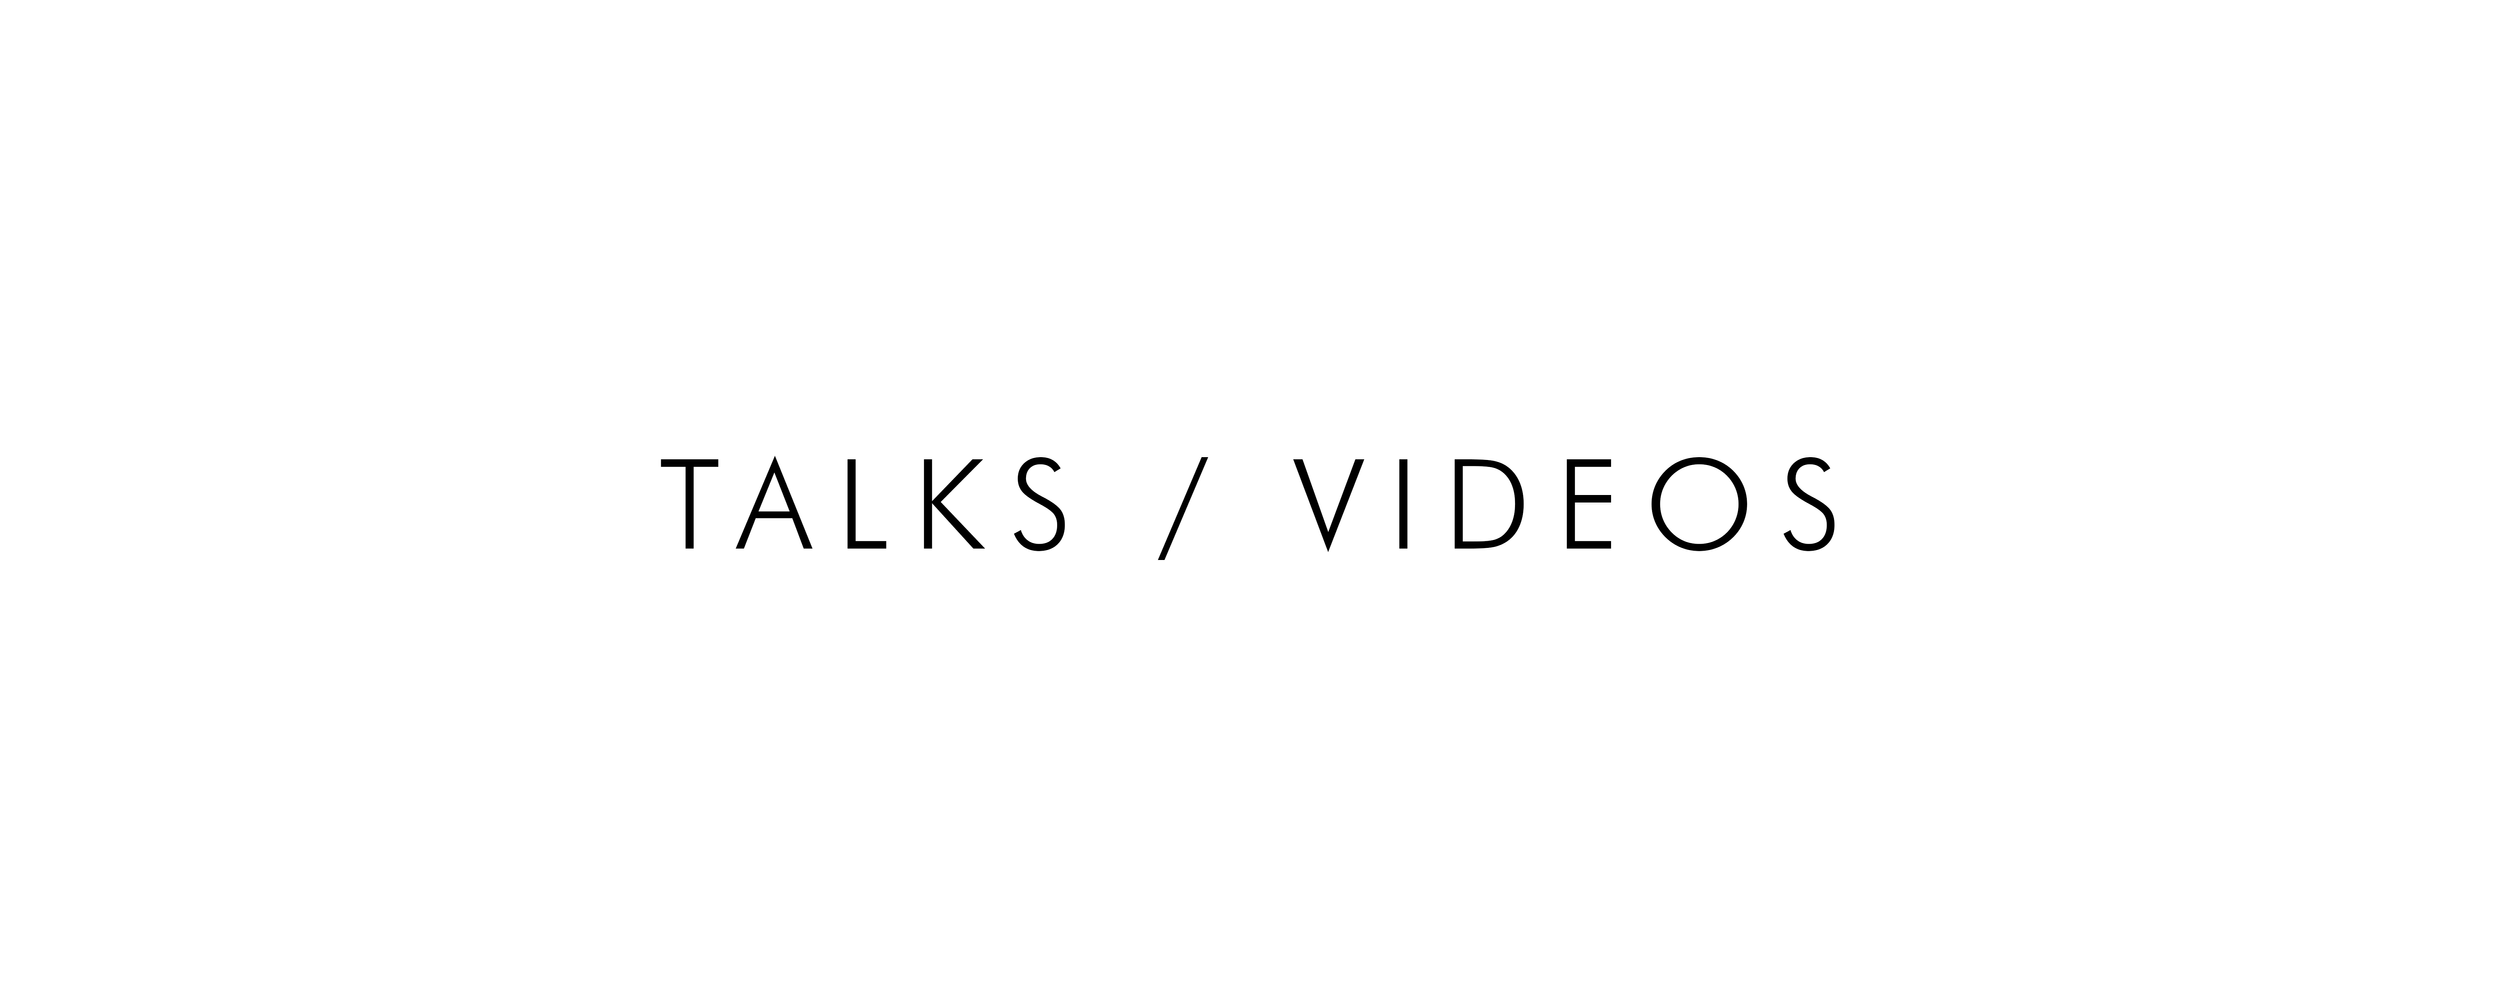 About_talks-videos_light.png